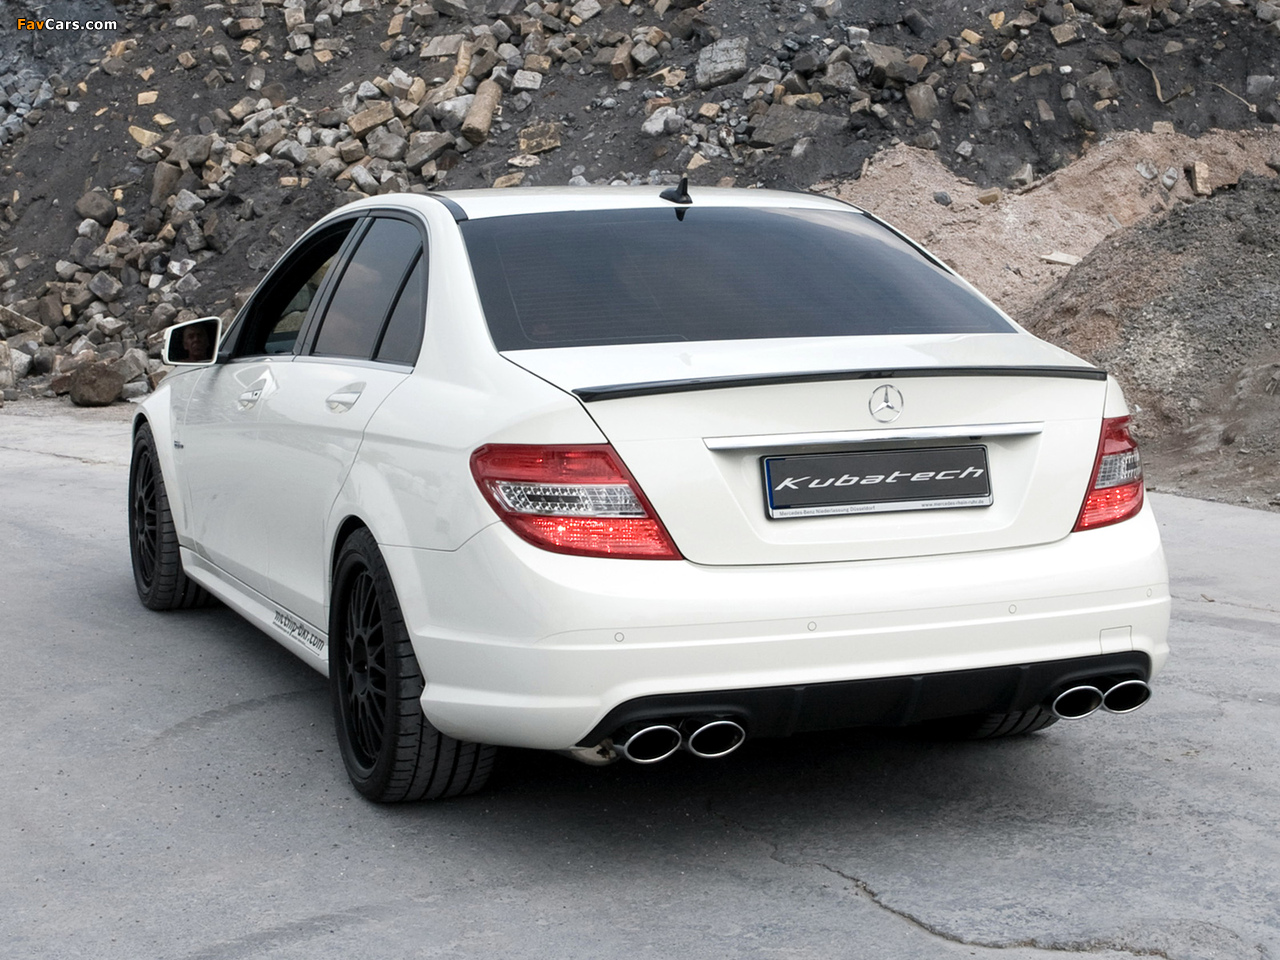 Images of Kubatech Mercedes-Benz C 63 AMG (W204) 2011 (1280 x 960)